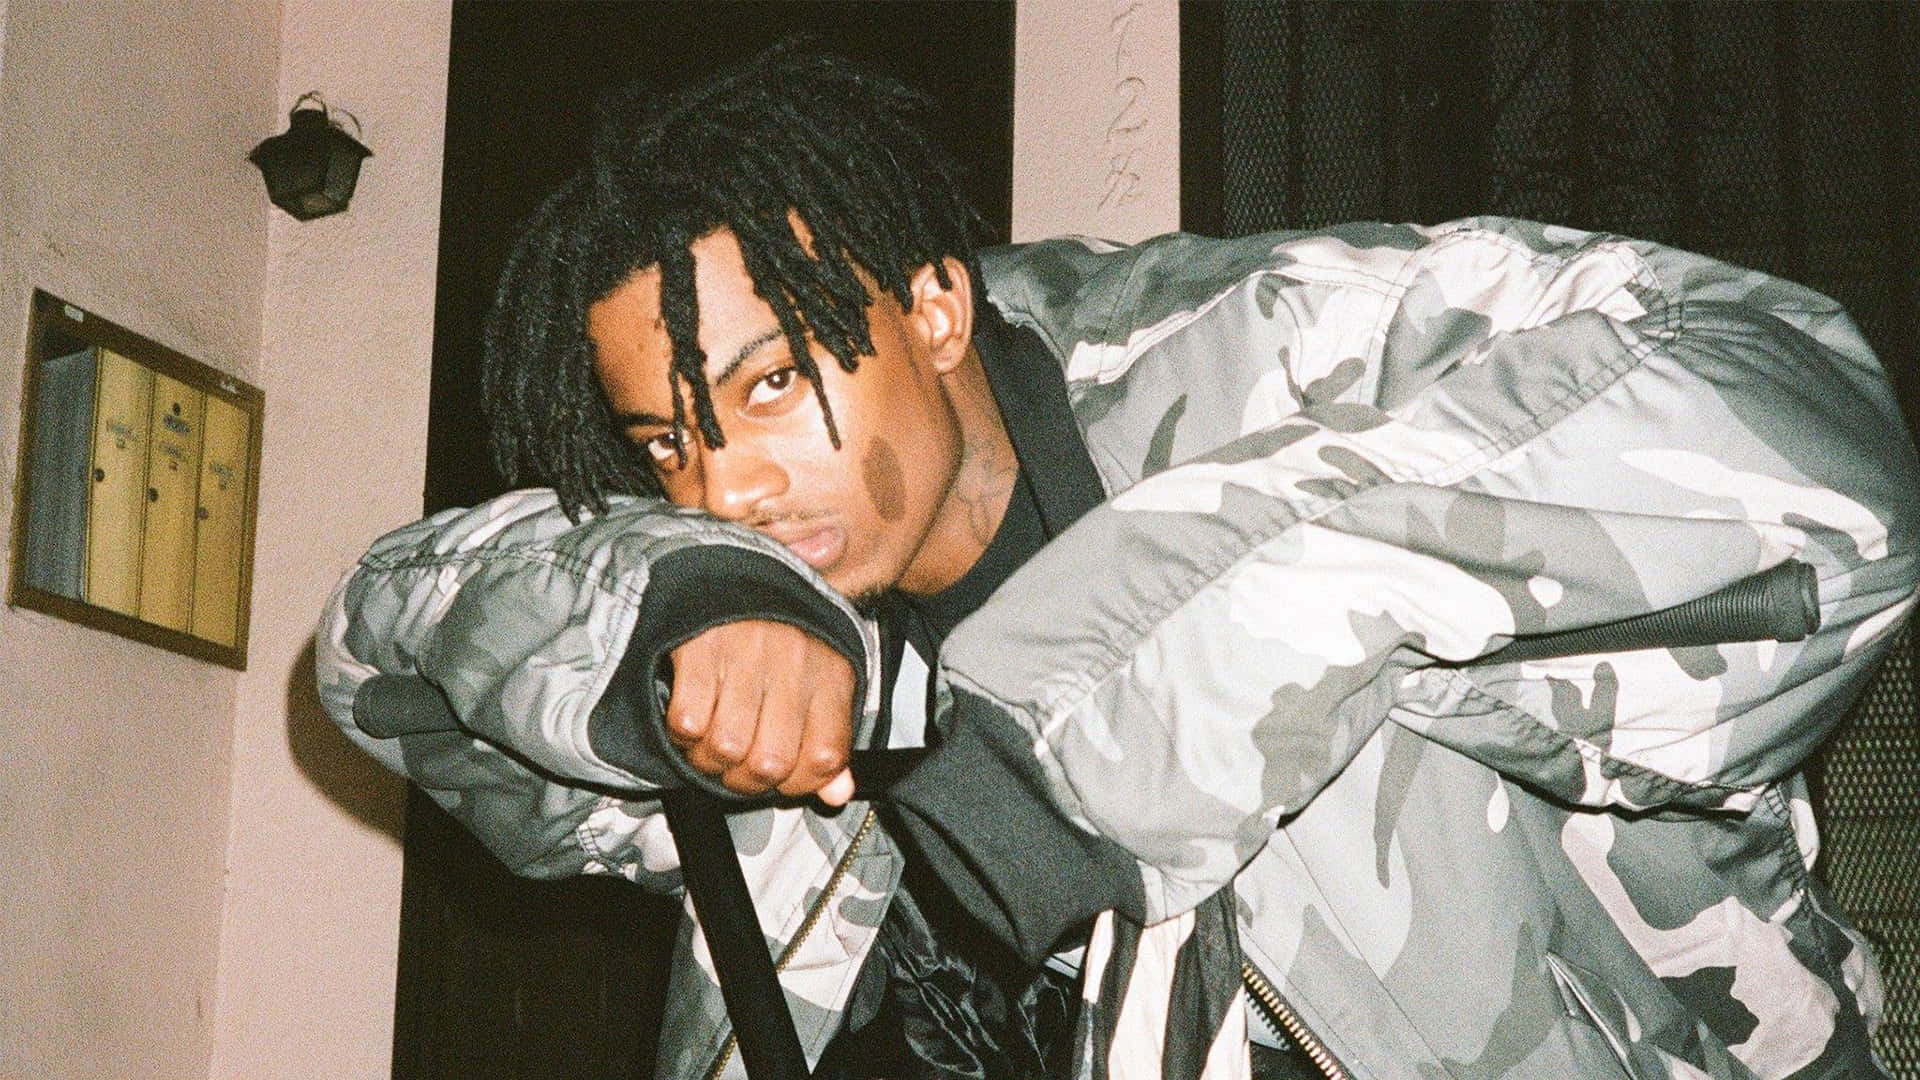 Playboi Carti Brings Young and Outrageous Energy to the Rap Scene